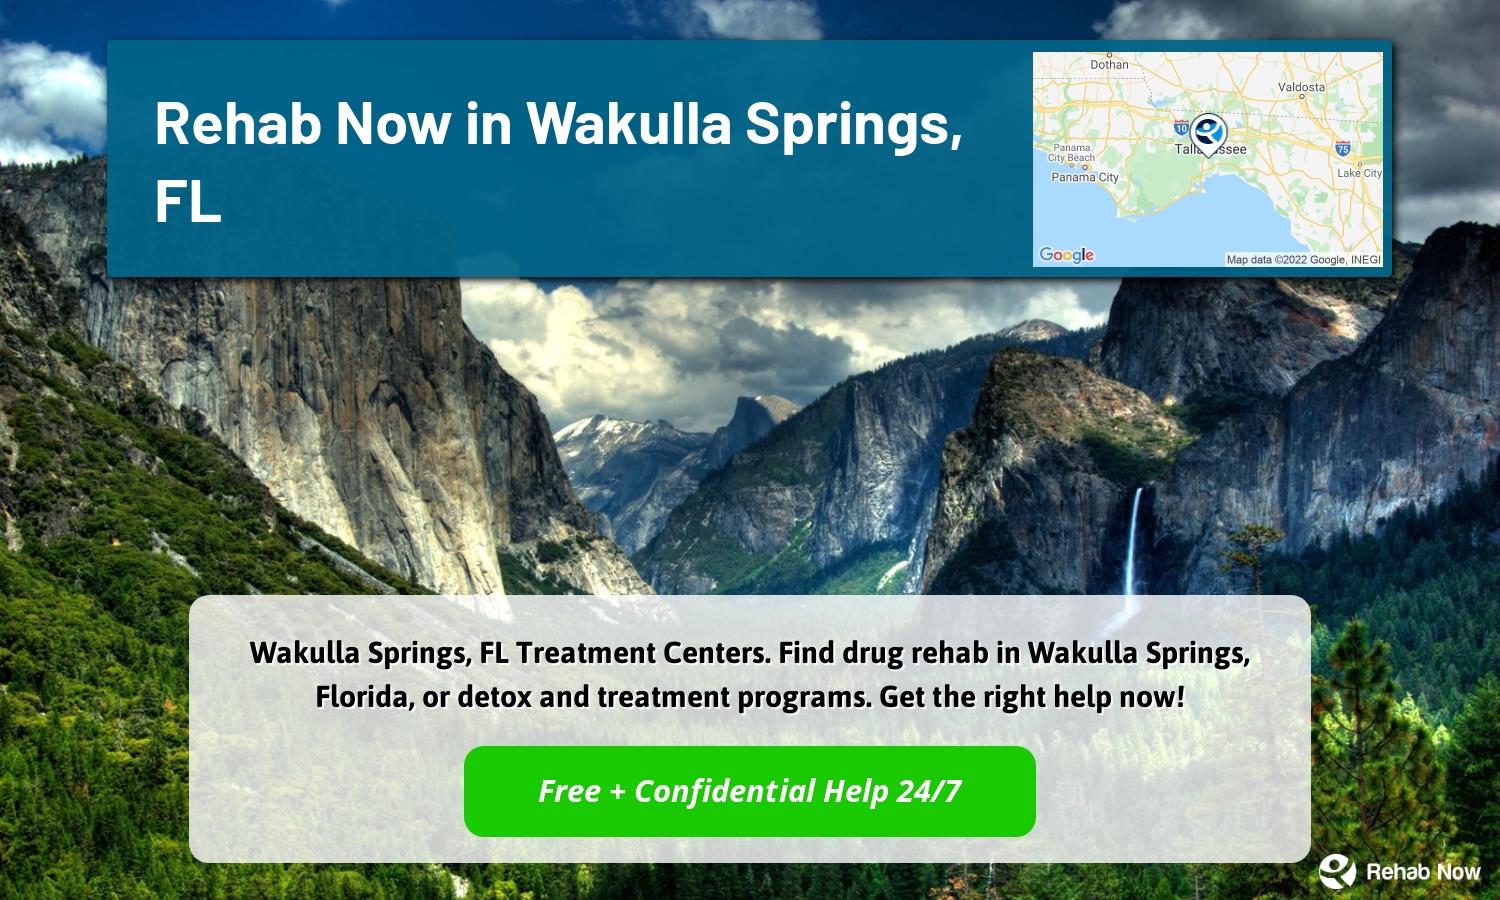 Wakulla Springs, FL Treatment Centers. Find drug rehab in Wakulla Springs, Florida, or detox and treatment programs. Get the right help now!